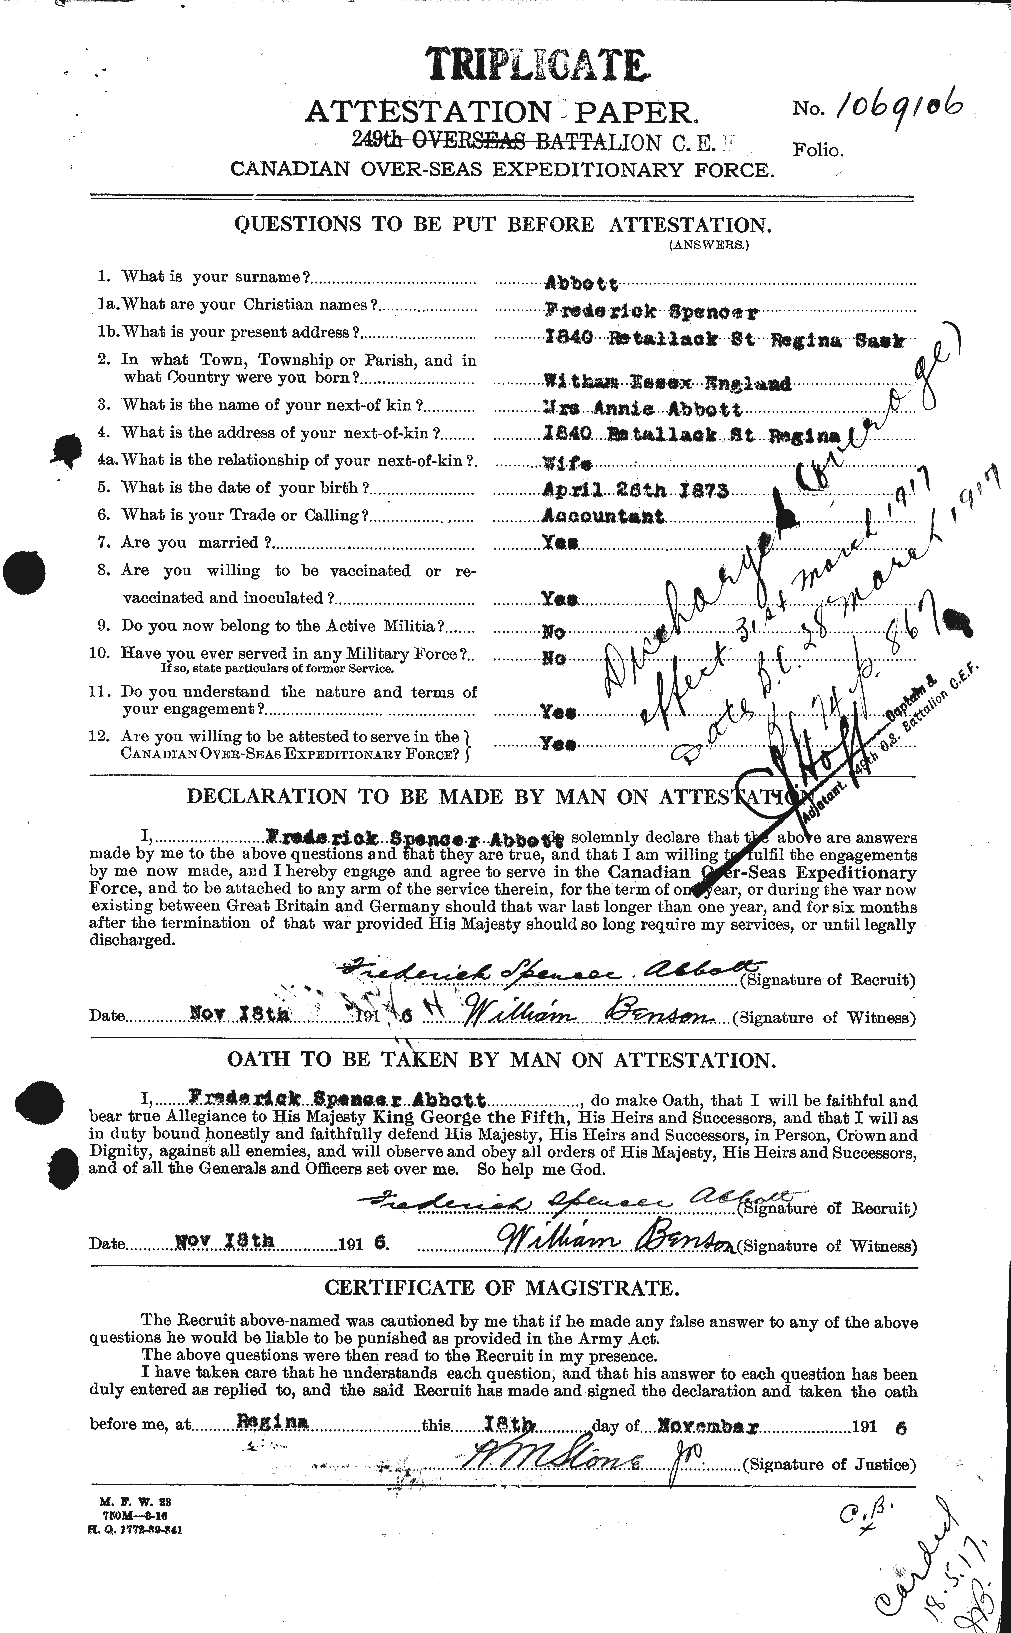 Personnel Records of the First World War - CEF 200928a